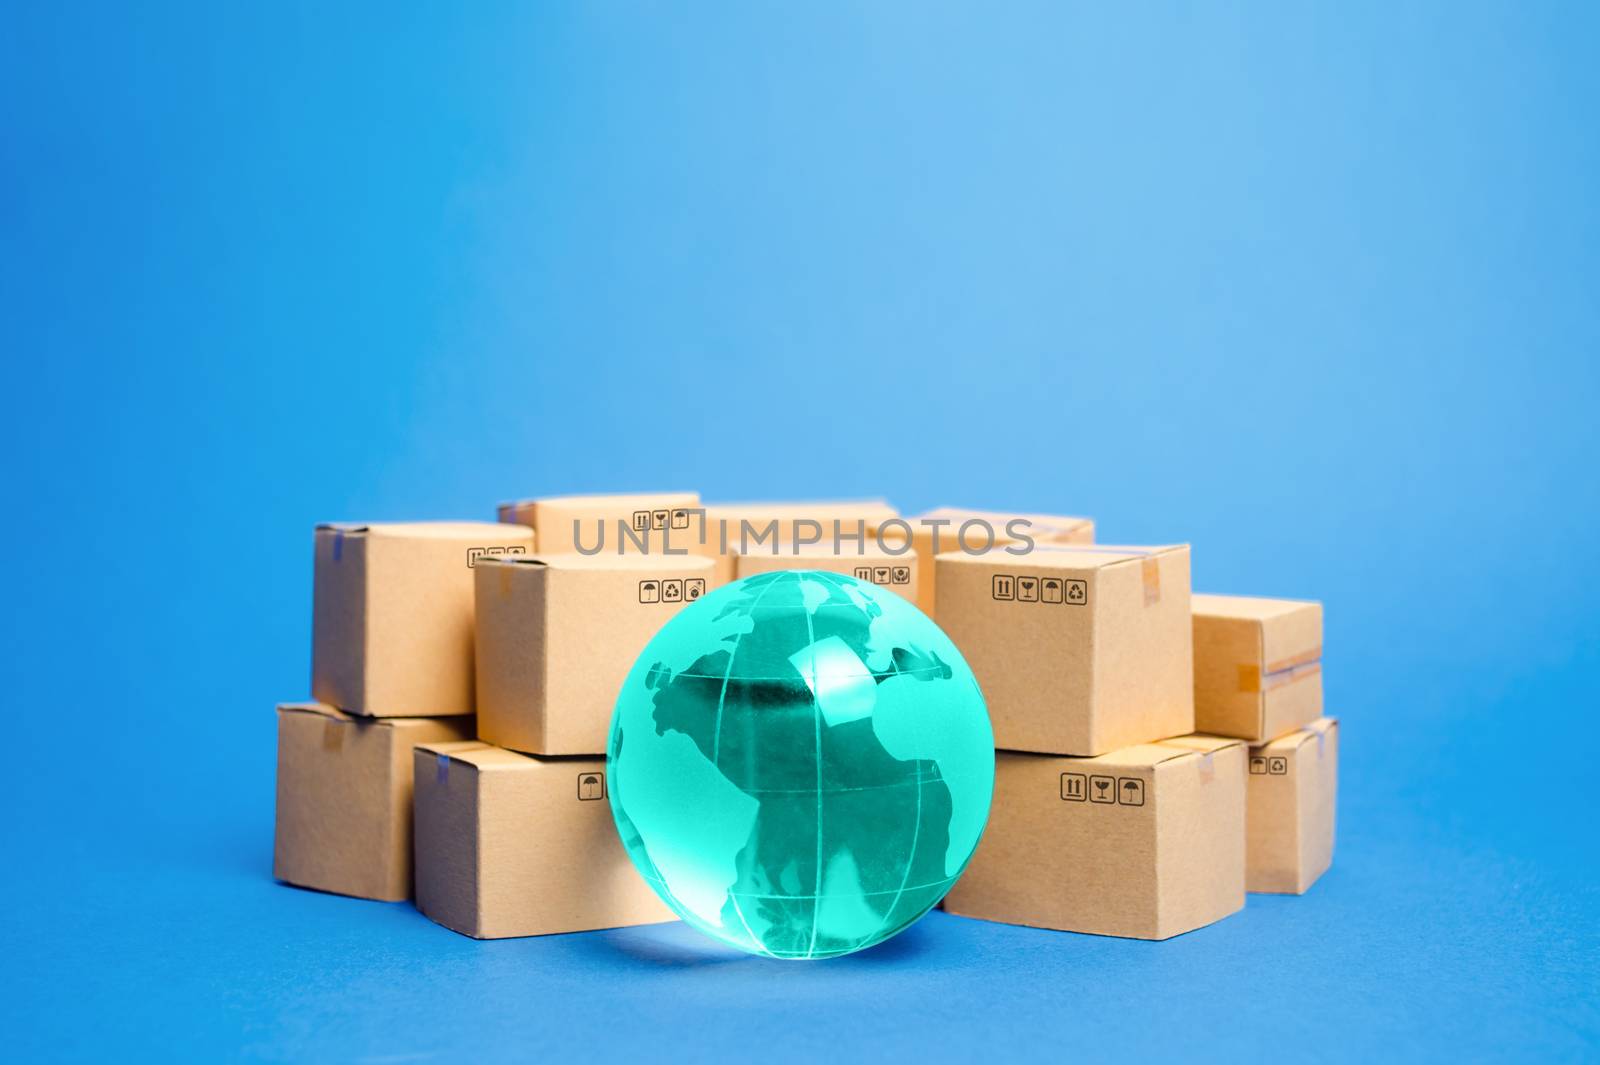 Earth globe is surrounded by boxes. Global business and international transportation of goods products. Shipping freight, world trade and economics. Distribution, import export. Commodity turnover